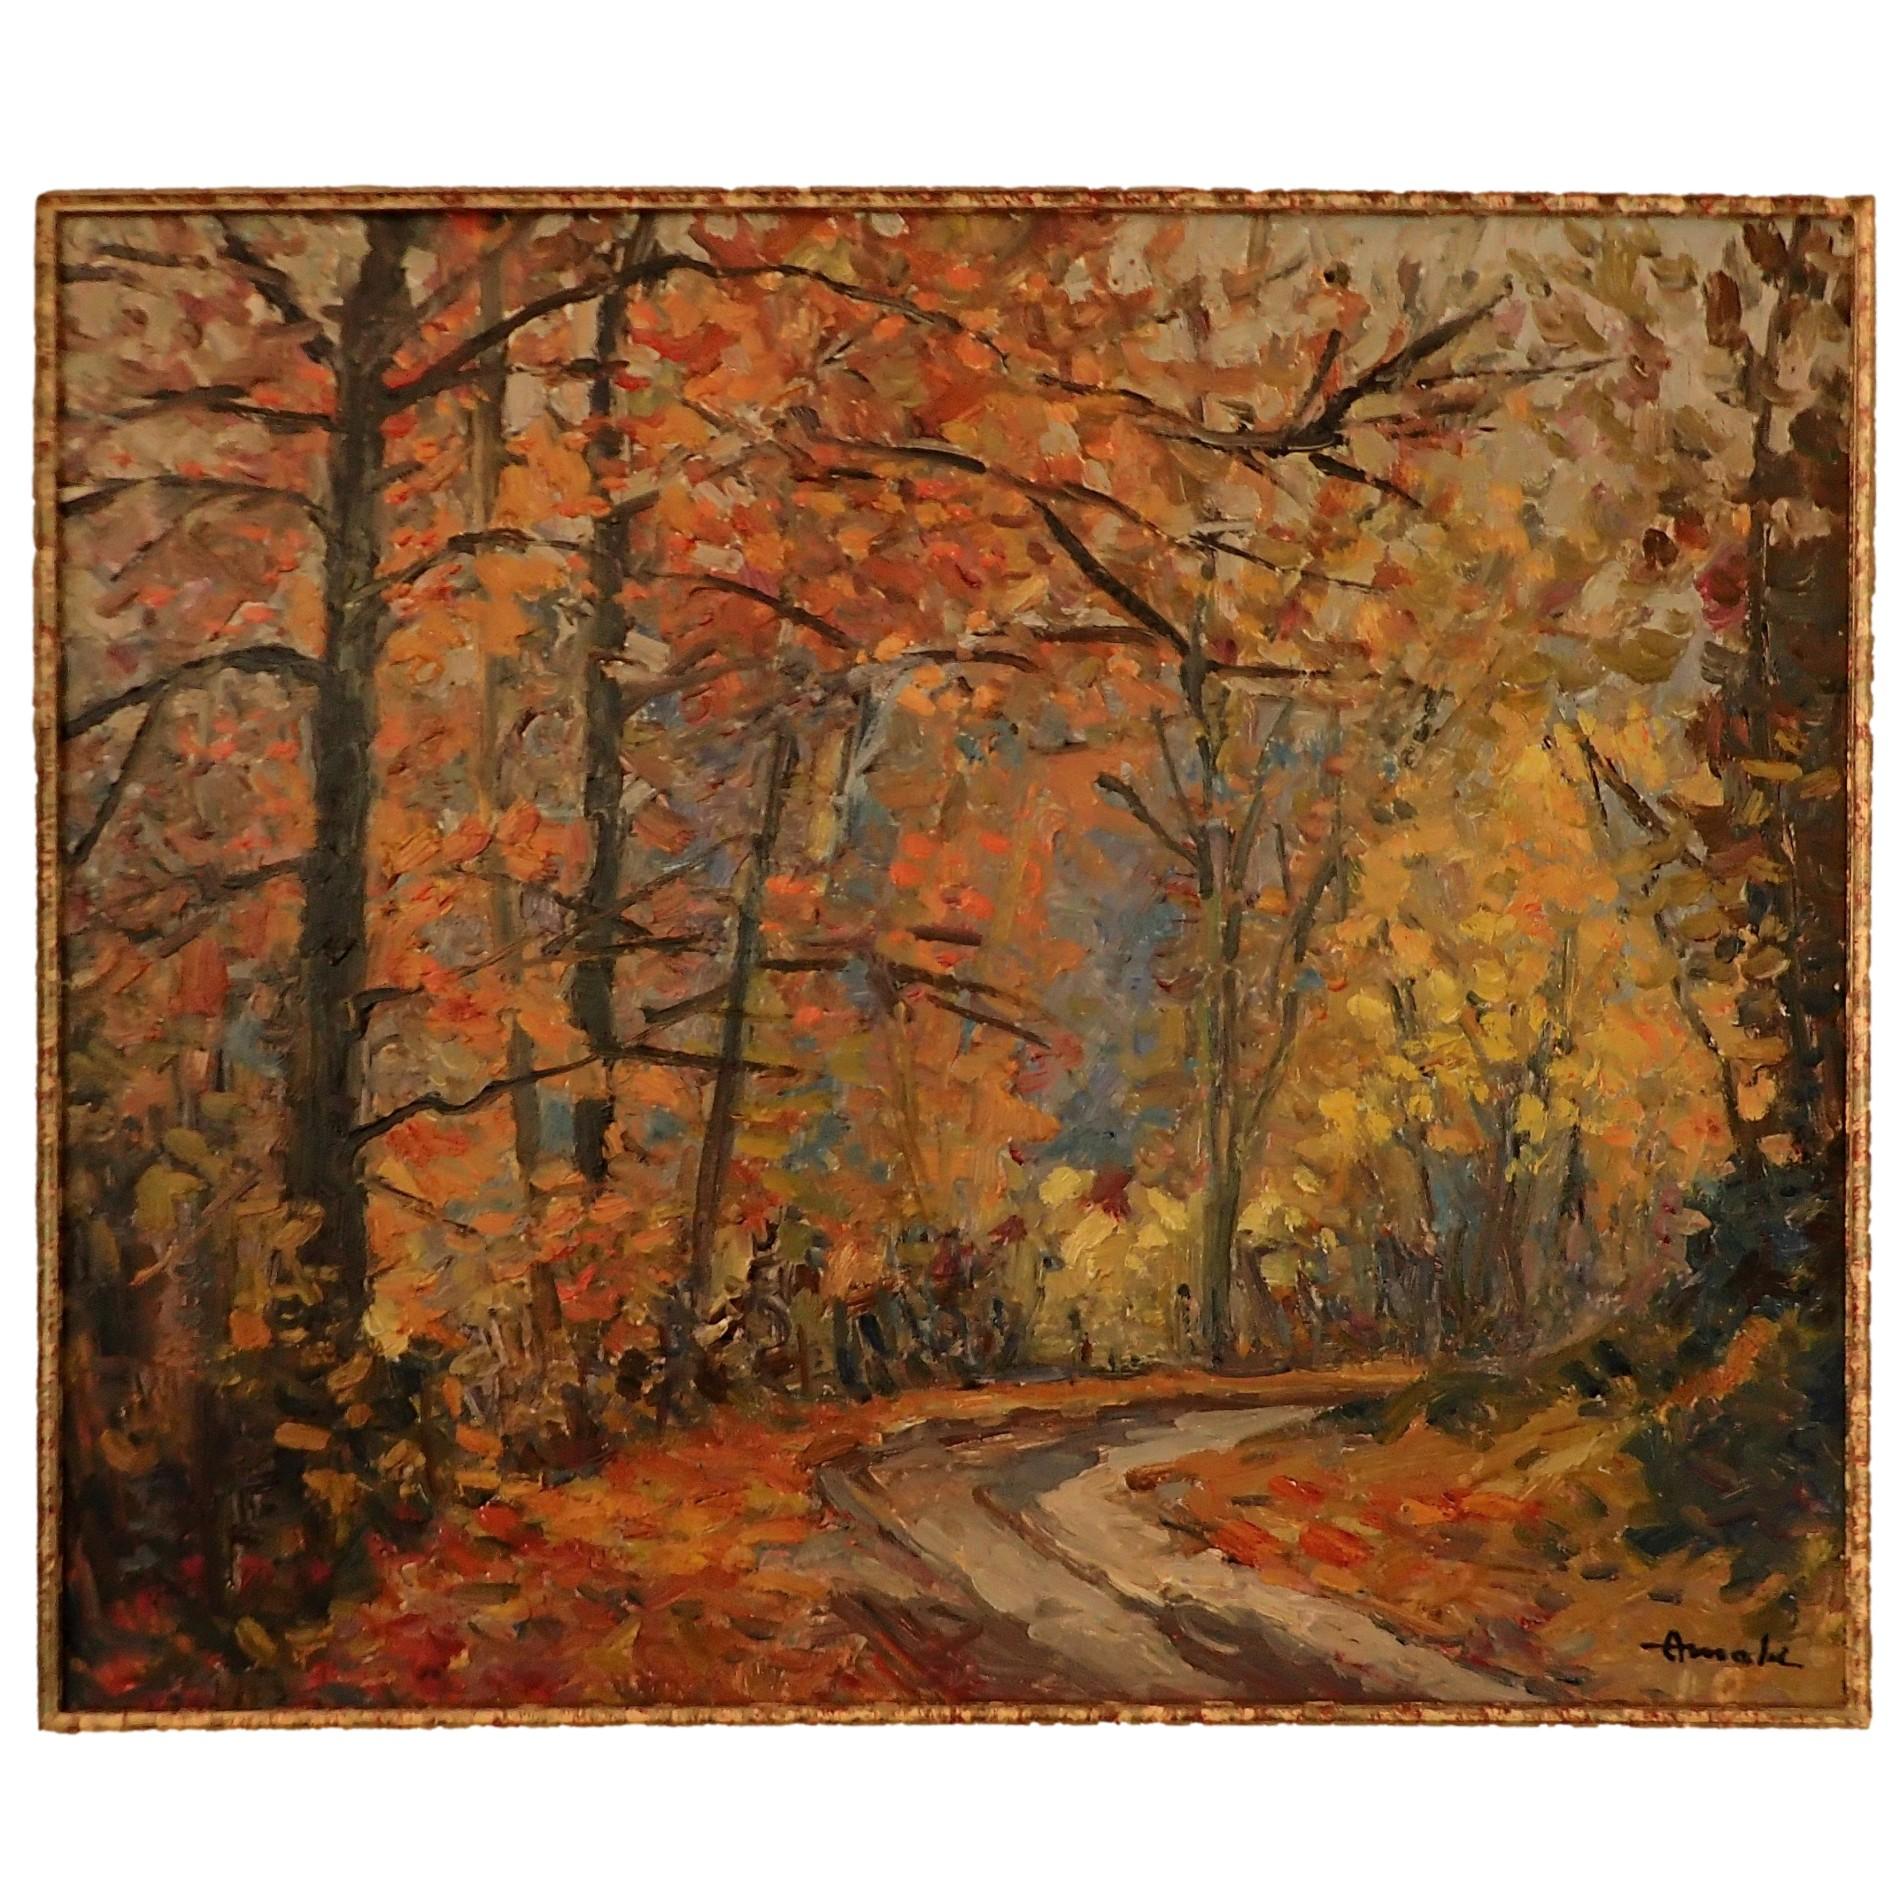 

A Beautiful Depiction of Forest Foliage Colors in Autumn, an oil on board painting by Albert Malet.

Born in Bosc le Hard, north of Rouen in 1912, Malet began painting at the age of 19, benefiting from the advice of his illustrious teacher, Robert